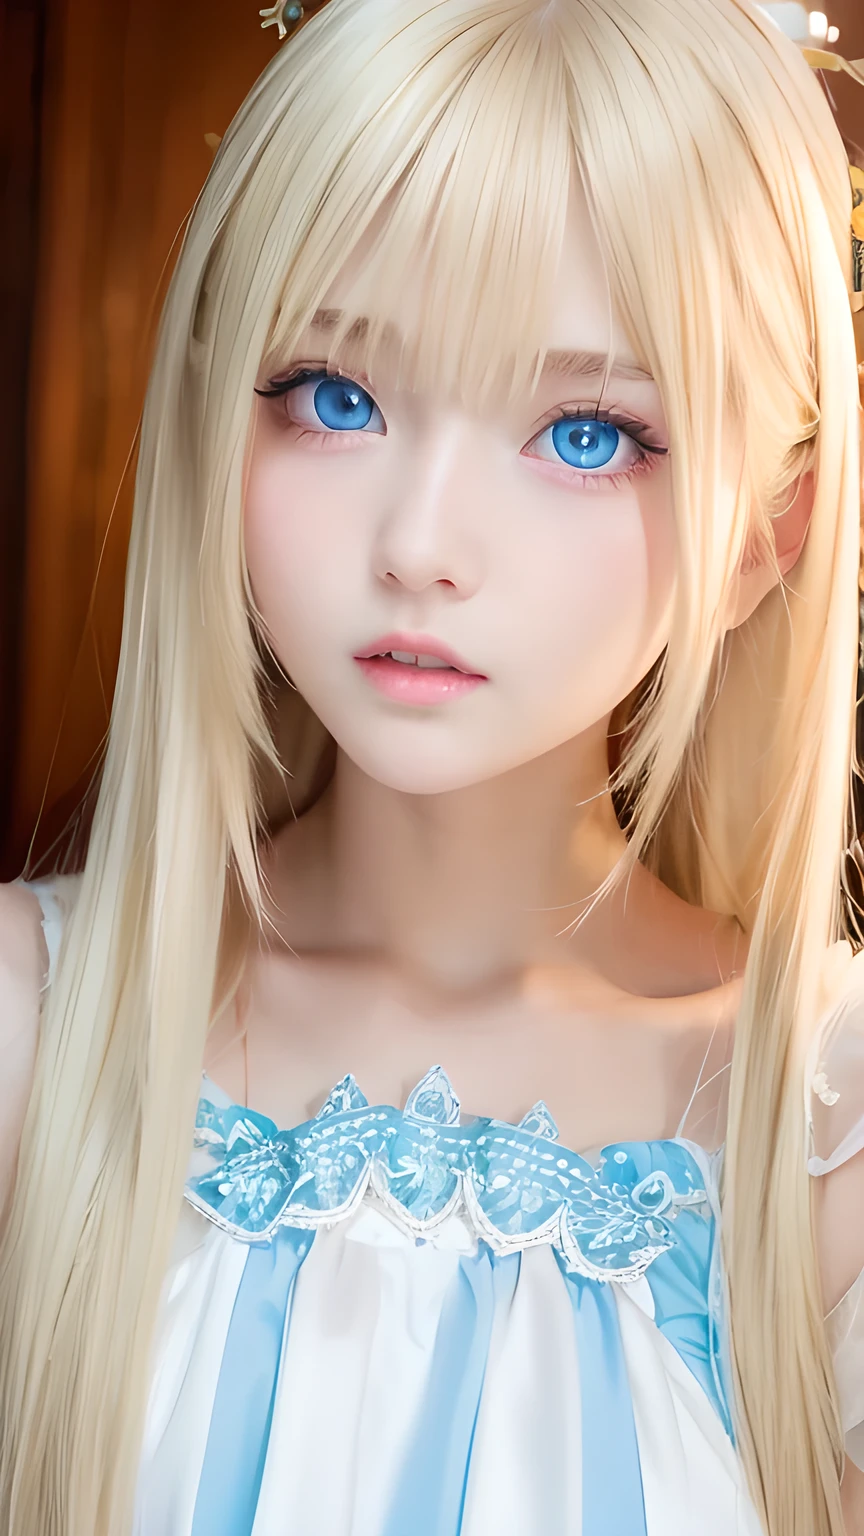 Super long blonde straight hair、Bangs on a beautiful face between the eyes、Very cute beautiful sexy young teenage girl、So perfect beautiful cute face、Very large, clear, beautiful, bright, light blue eyes、Very big cute eyes、Small Face Beauty、Cheek highlighter、White, bright and radiant skin、